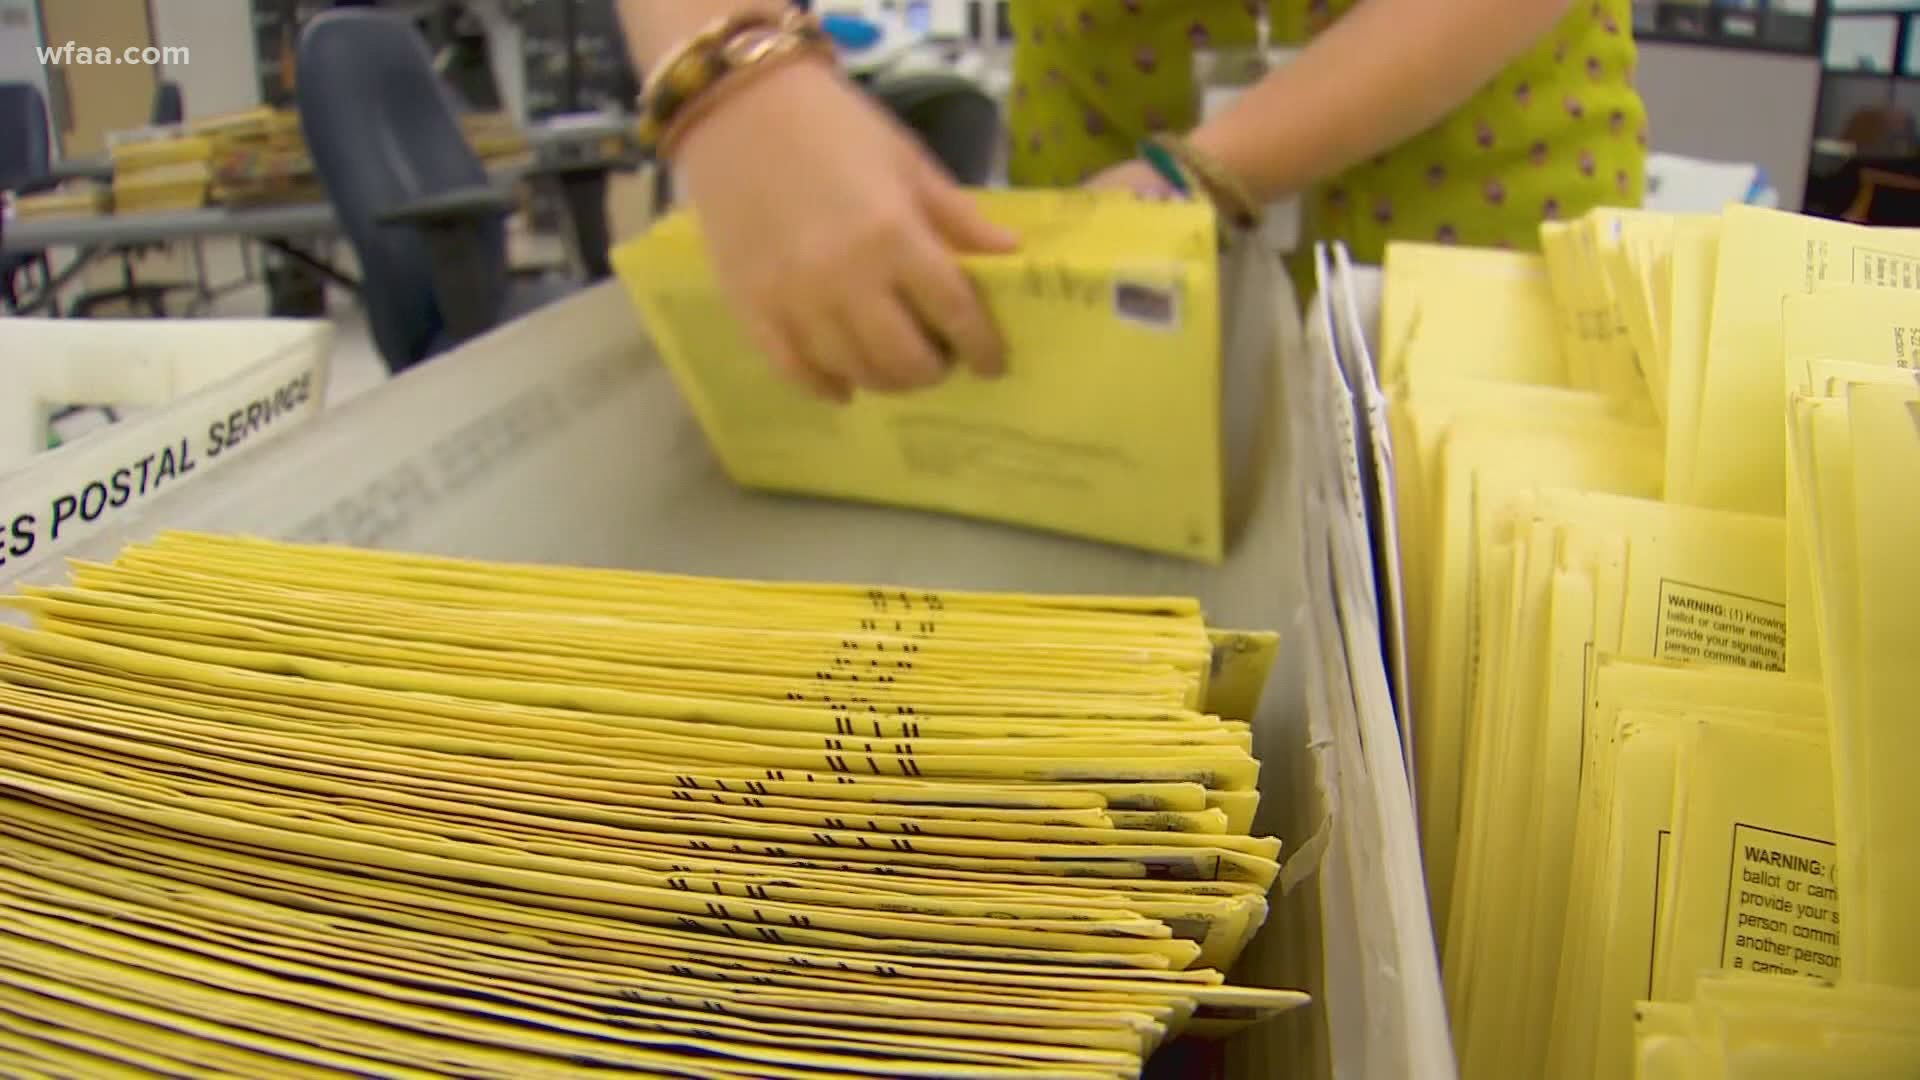 If North Texas voters can't get their ballot in the mail quickly, they can also take it to a drop-off location in their county to ensure their ballot gets in on time